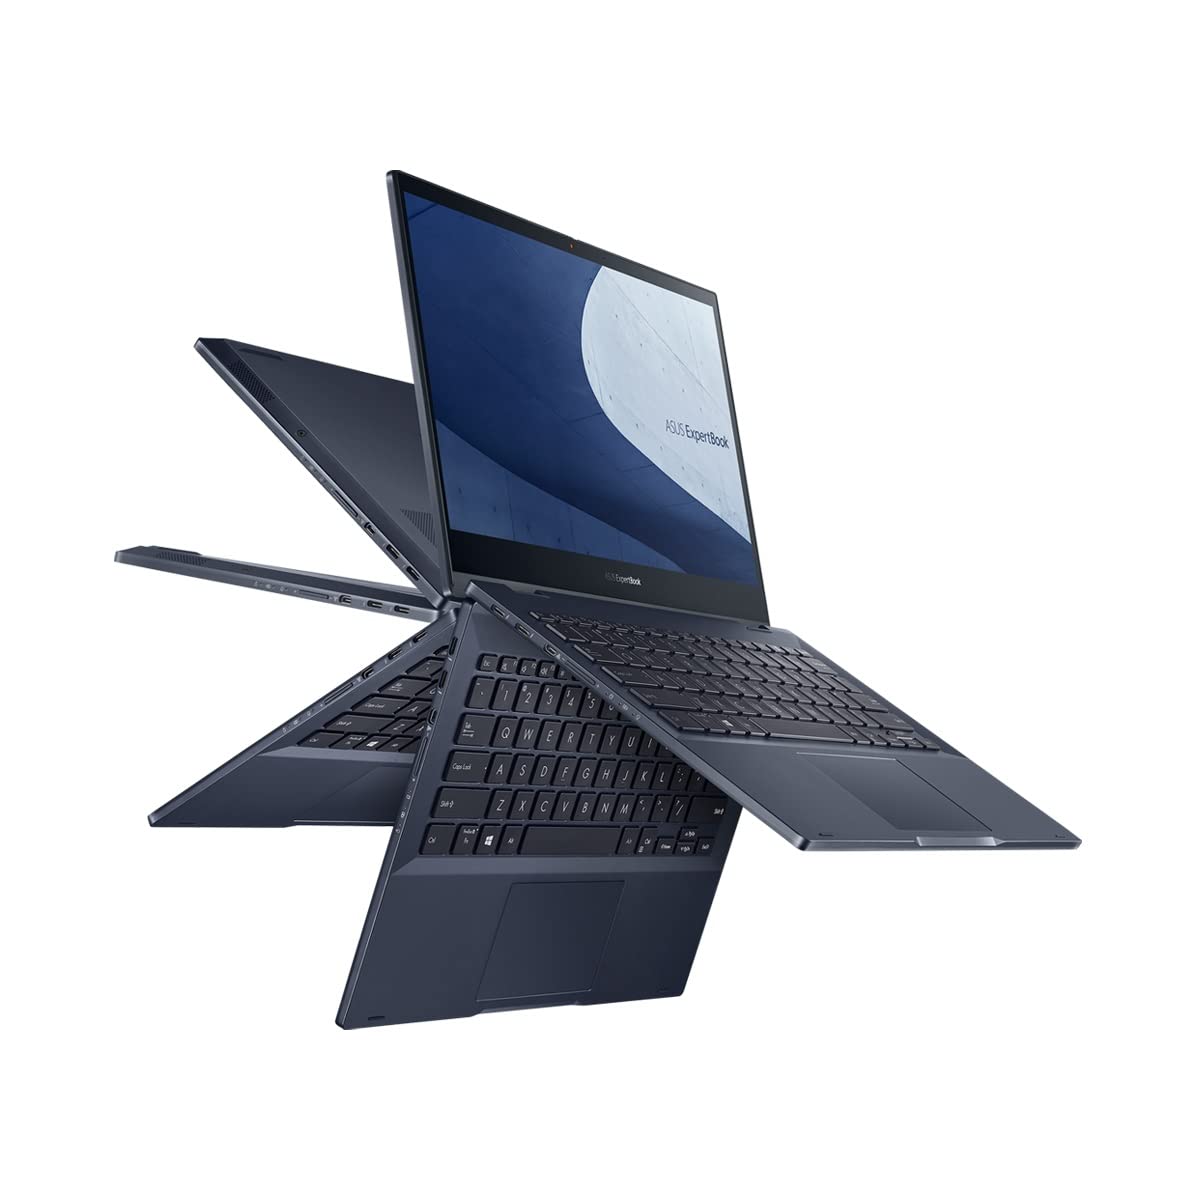 ASUS ExpertBook B5 Thin & Light Flip Business Laptop, 13.3” FHD OLED, Intel Core i7-1165G7, 1TB SSD, 32GB RAM, all day battery, Enterprise-grade video conference, NumberPad, Win 10 Pro, B5302FEA-XH77T